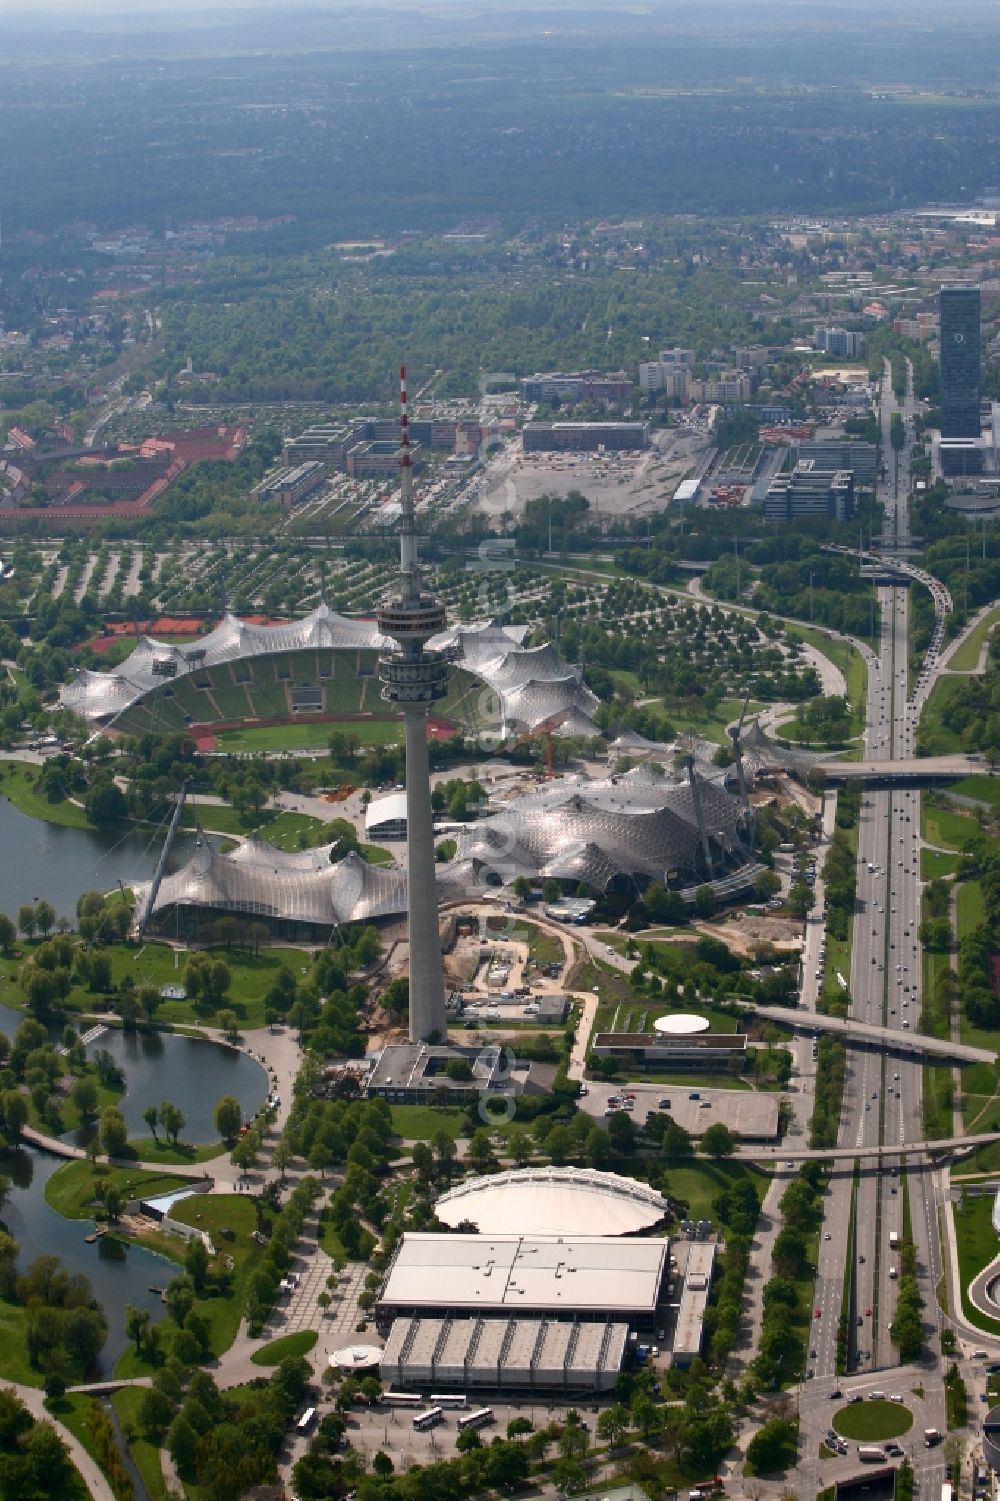 München from the bird's eye view: The Olympic Stadium in Munich, the Olympic Tower, the Olympic Hall and the Olympic lake are the key elements of the central sports facility Olympic Park and were the main locations in the 1972 Summer Olympics in Munich in Bavaria. The sports facilities are located along the four-lane thoroughfare Georg-Brauchle-Ring. The great hall below the Olympic Tower, the Olympic Ice Sports Center, which consists of the Olympic Ice Stadium, the SoccArena and a training hall. The Eisport Stadium is the venue of the DEL team Red Bull Munich